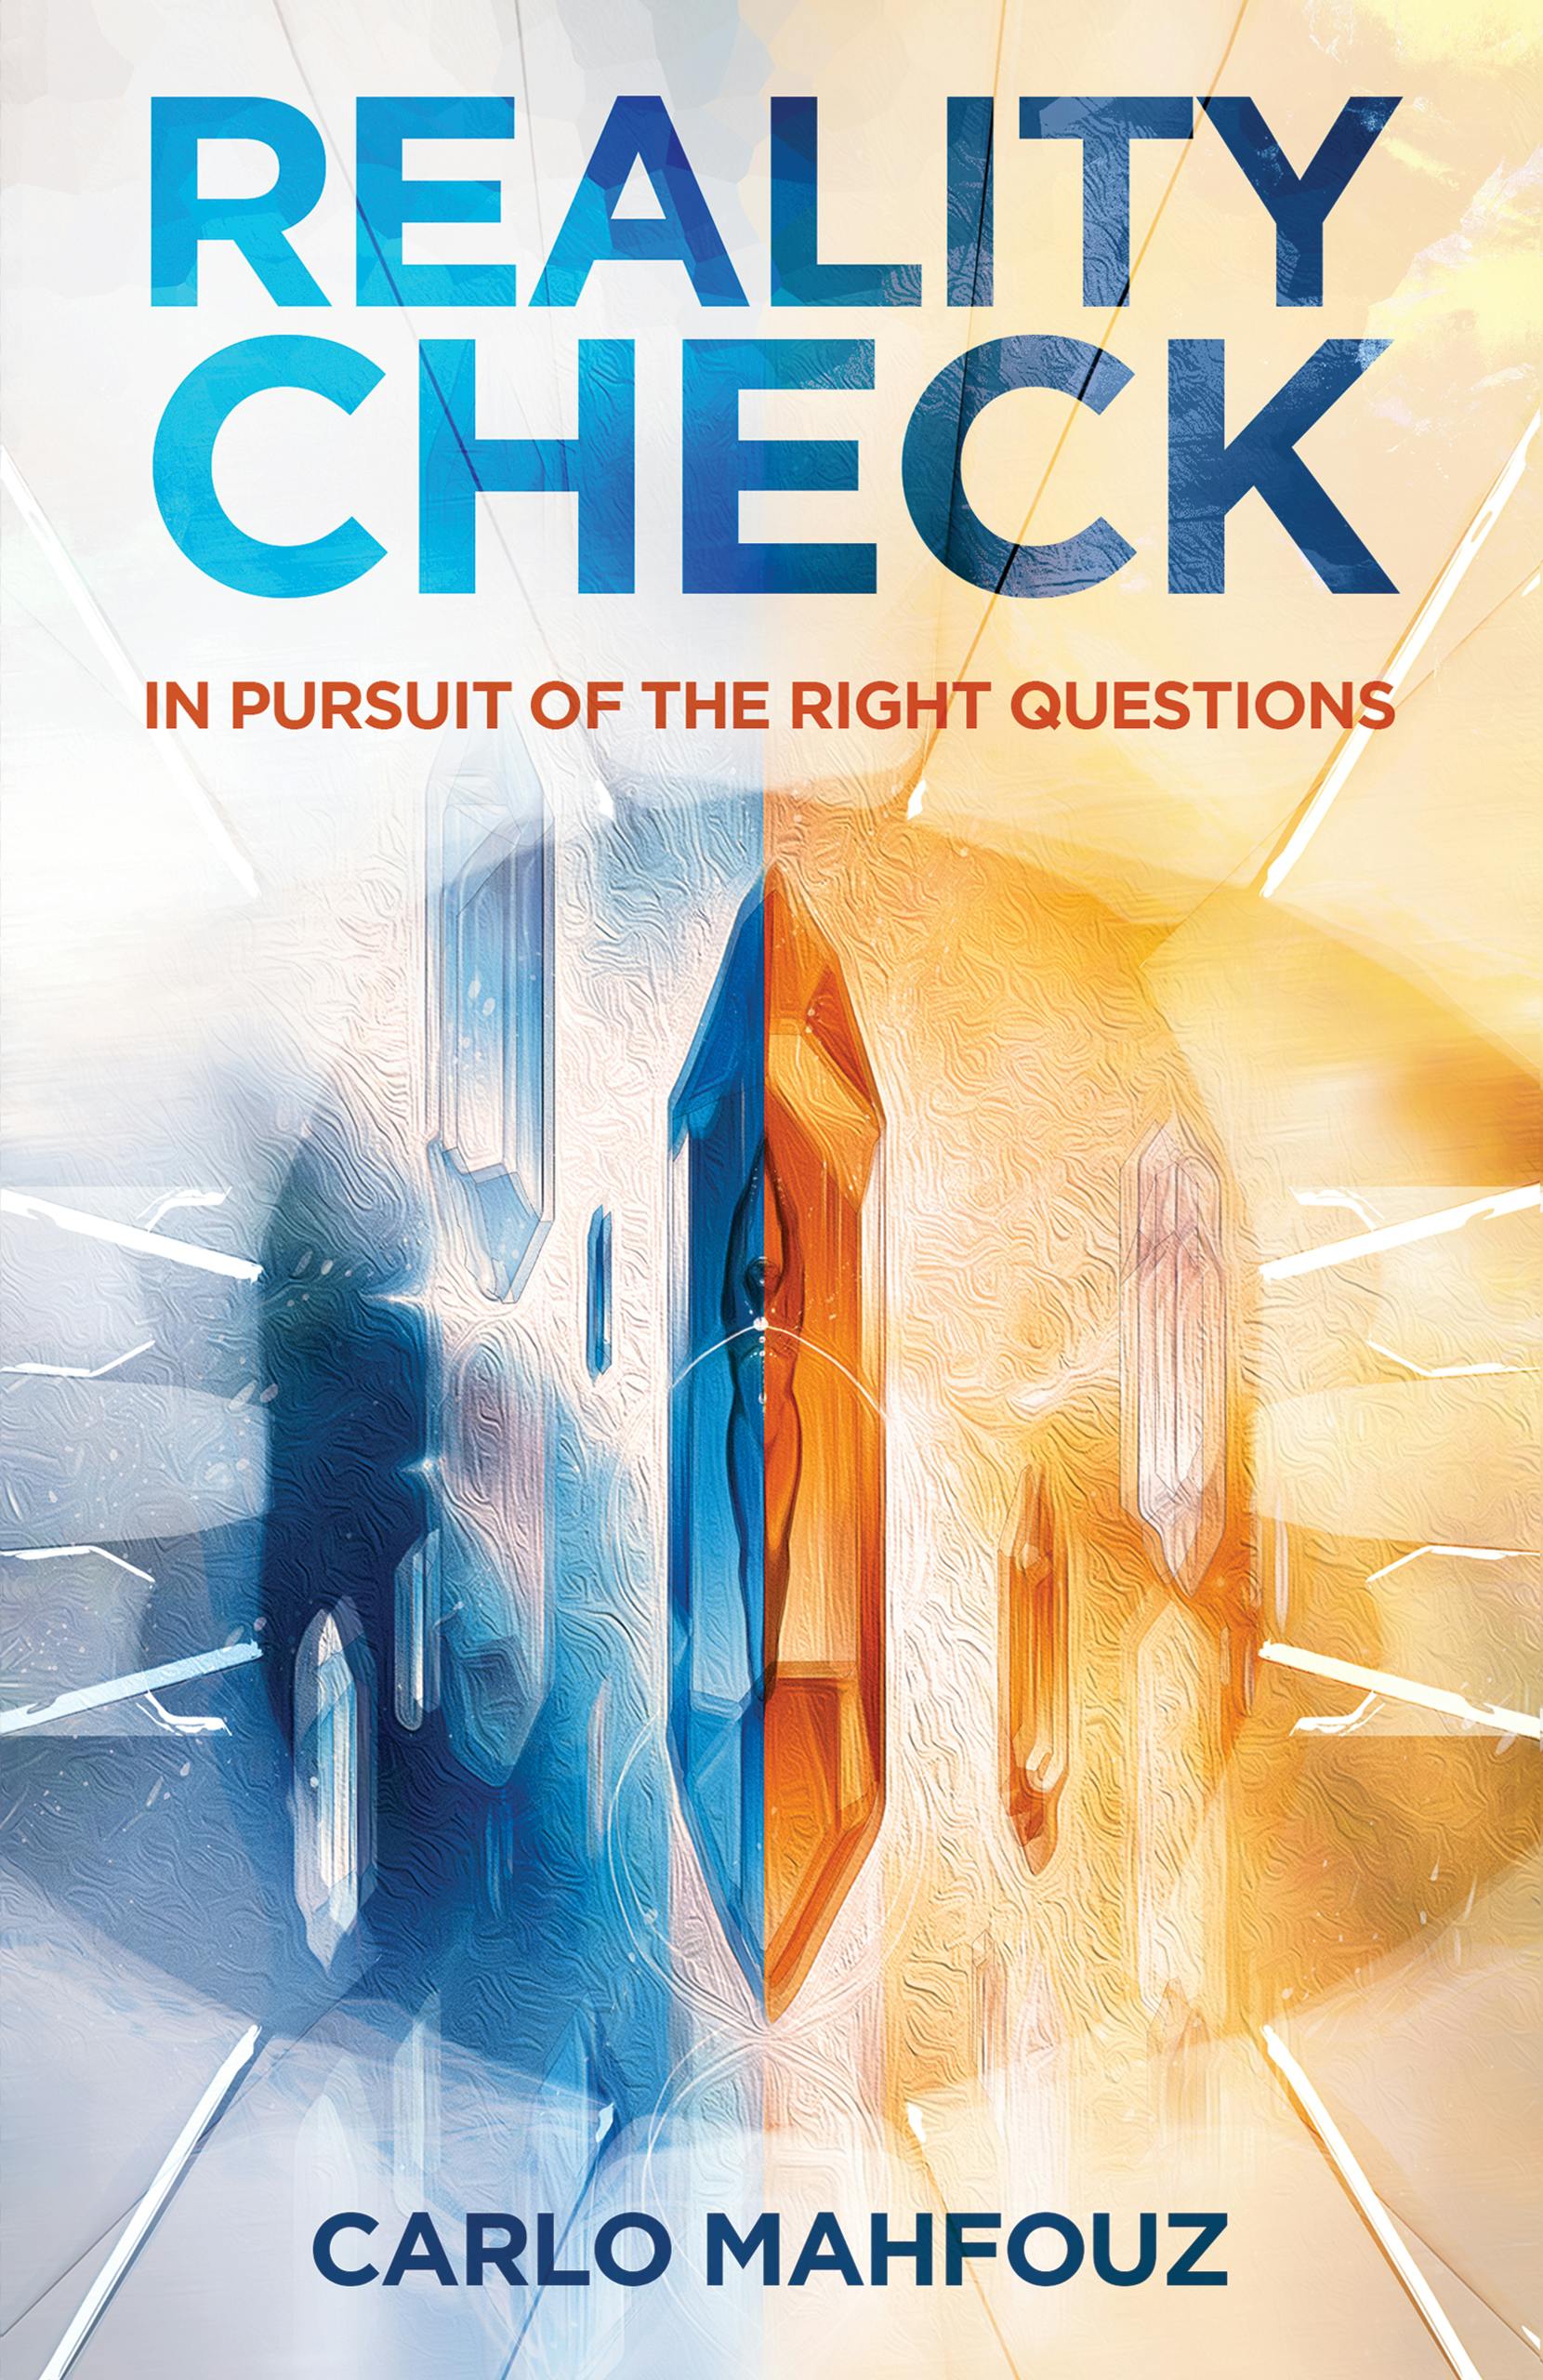 Reality Check, In Pursuit of the Right Questions by Carlo Mahfouz